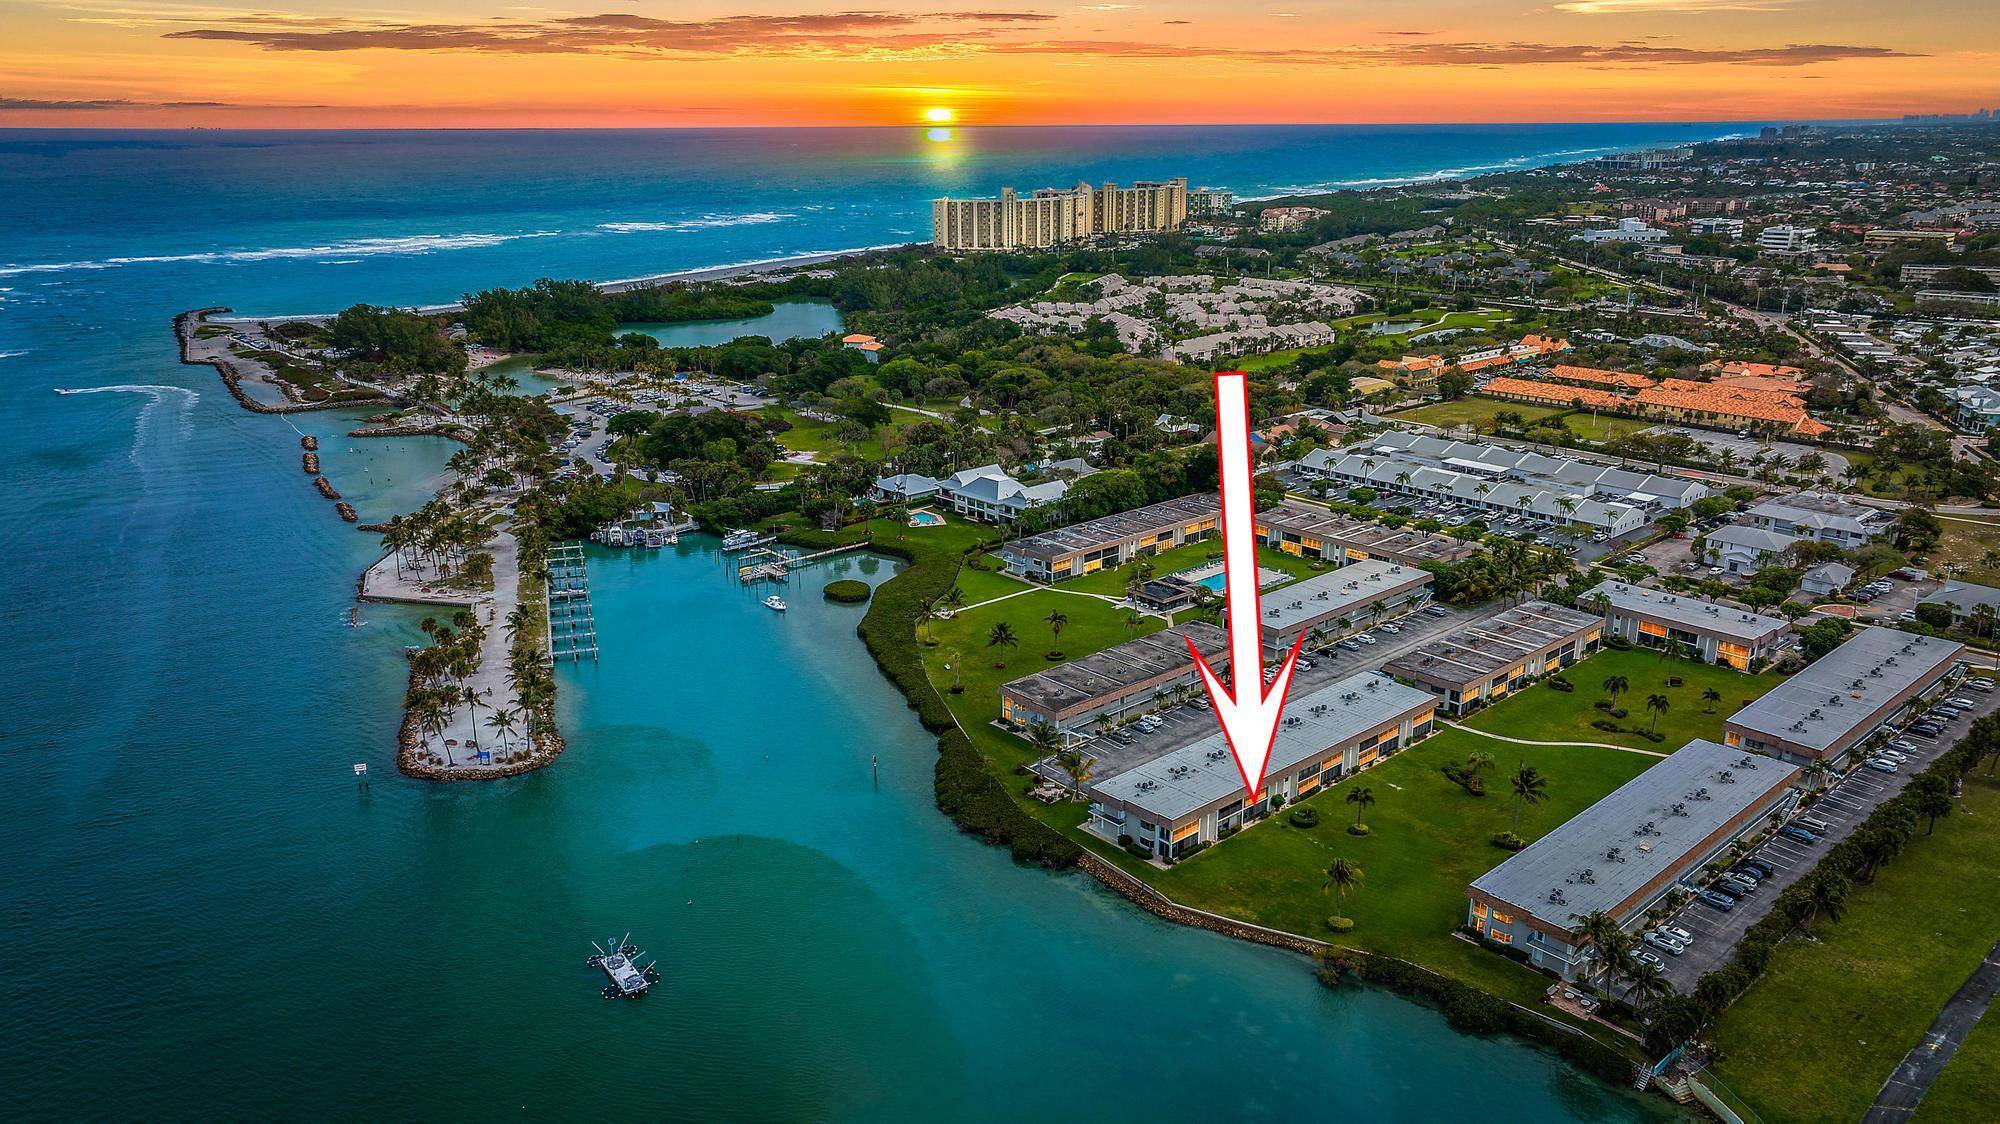 Welcome to your new condo in the prestigious 55 community of Jupiter Inlet !